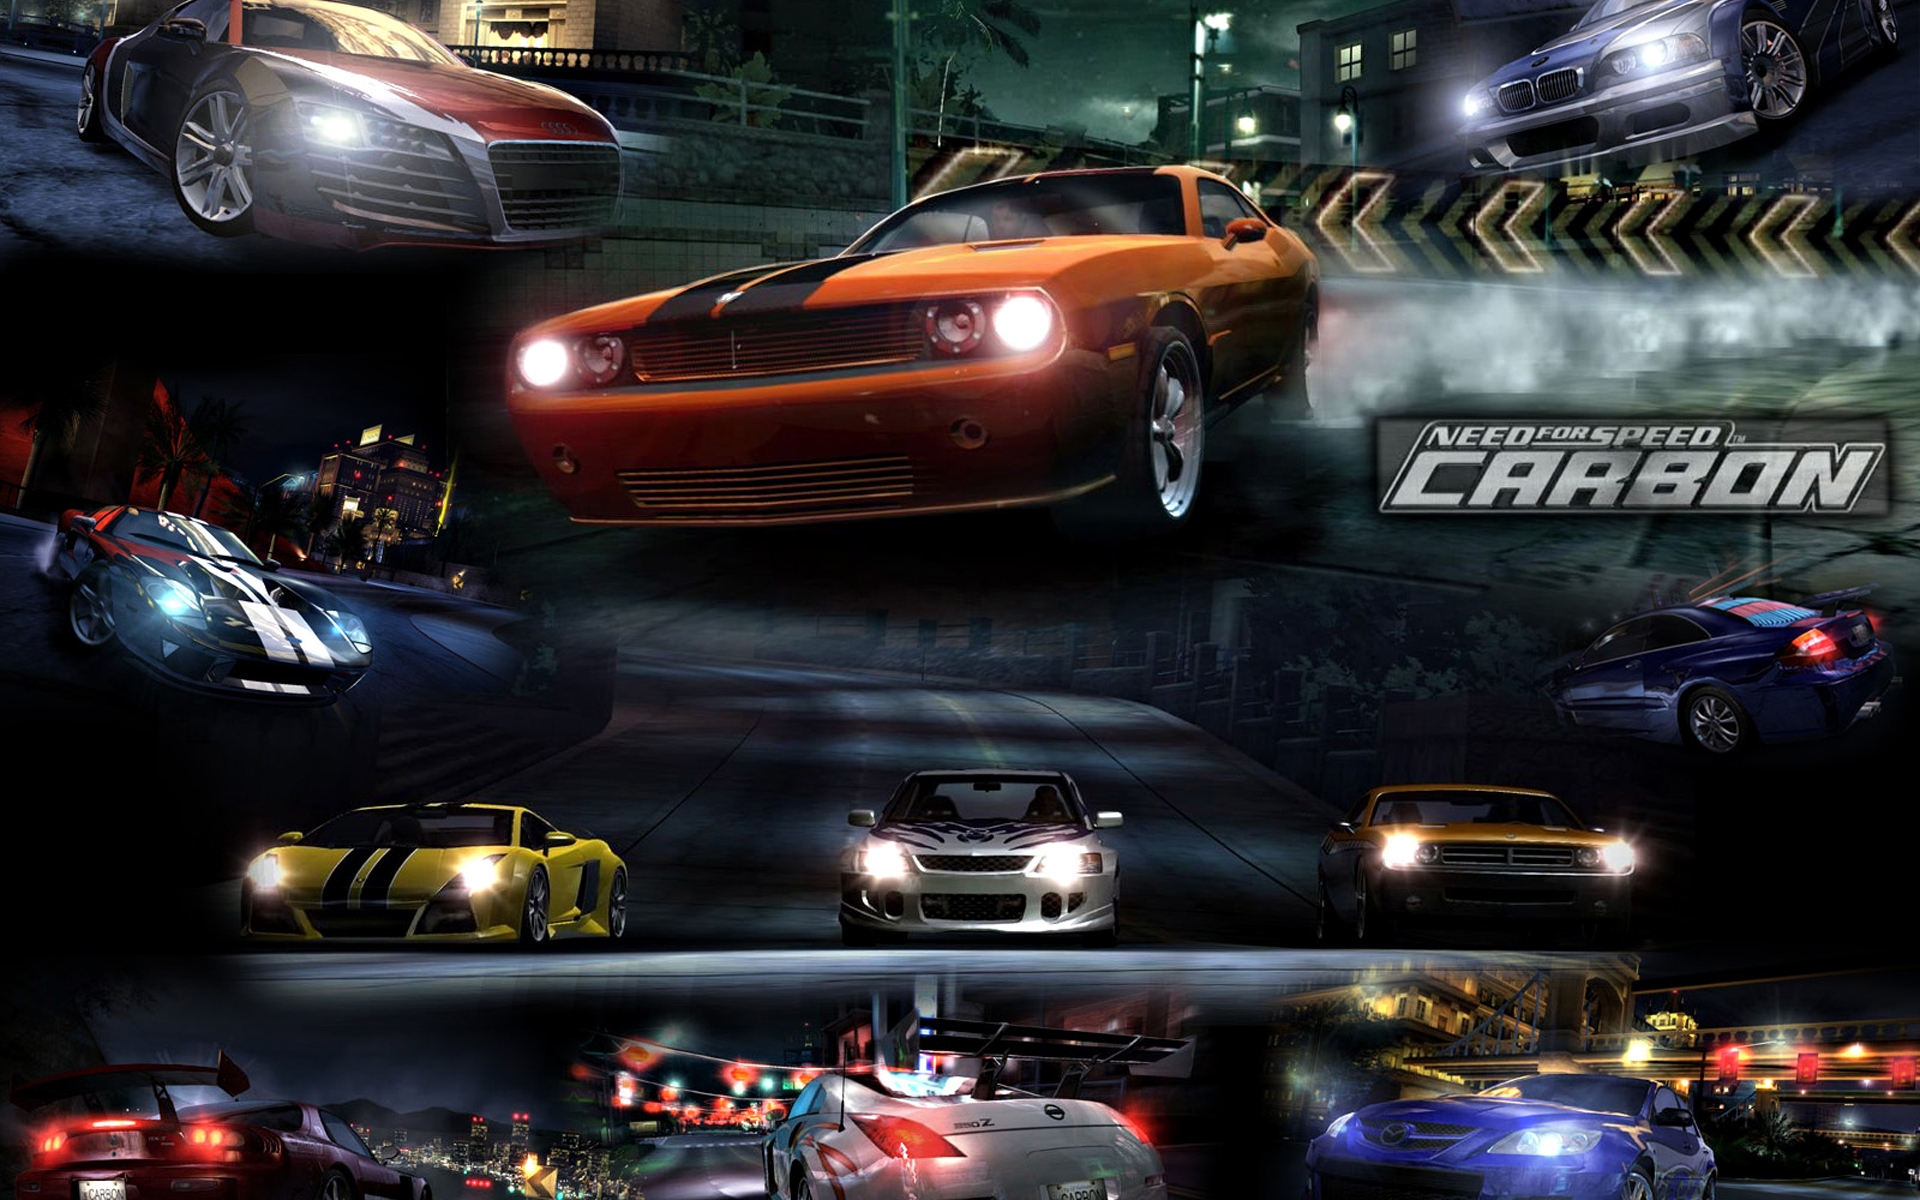 Nfs assemble. Need for Speed: Carbon. Need for Speed карбон. Нфс карбон машины. Need for Speed Carbon обои.